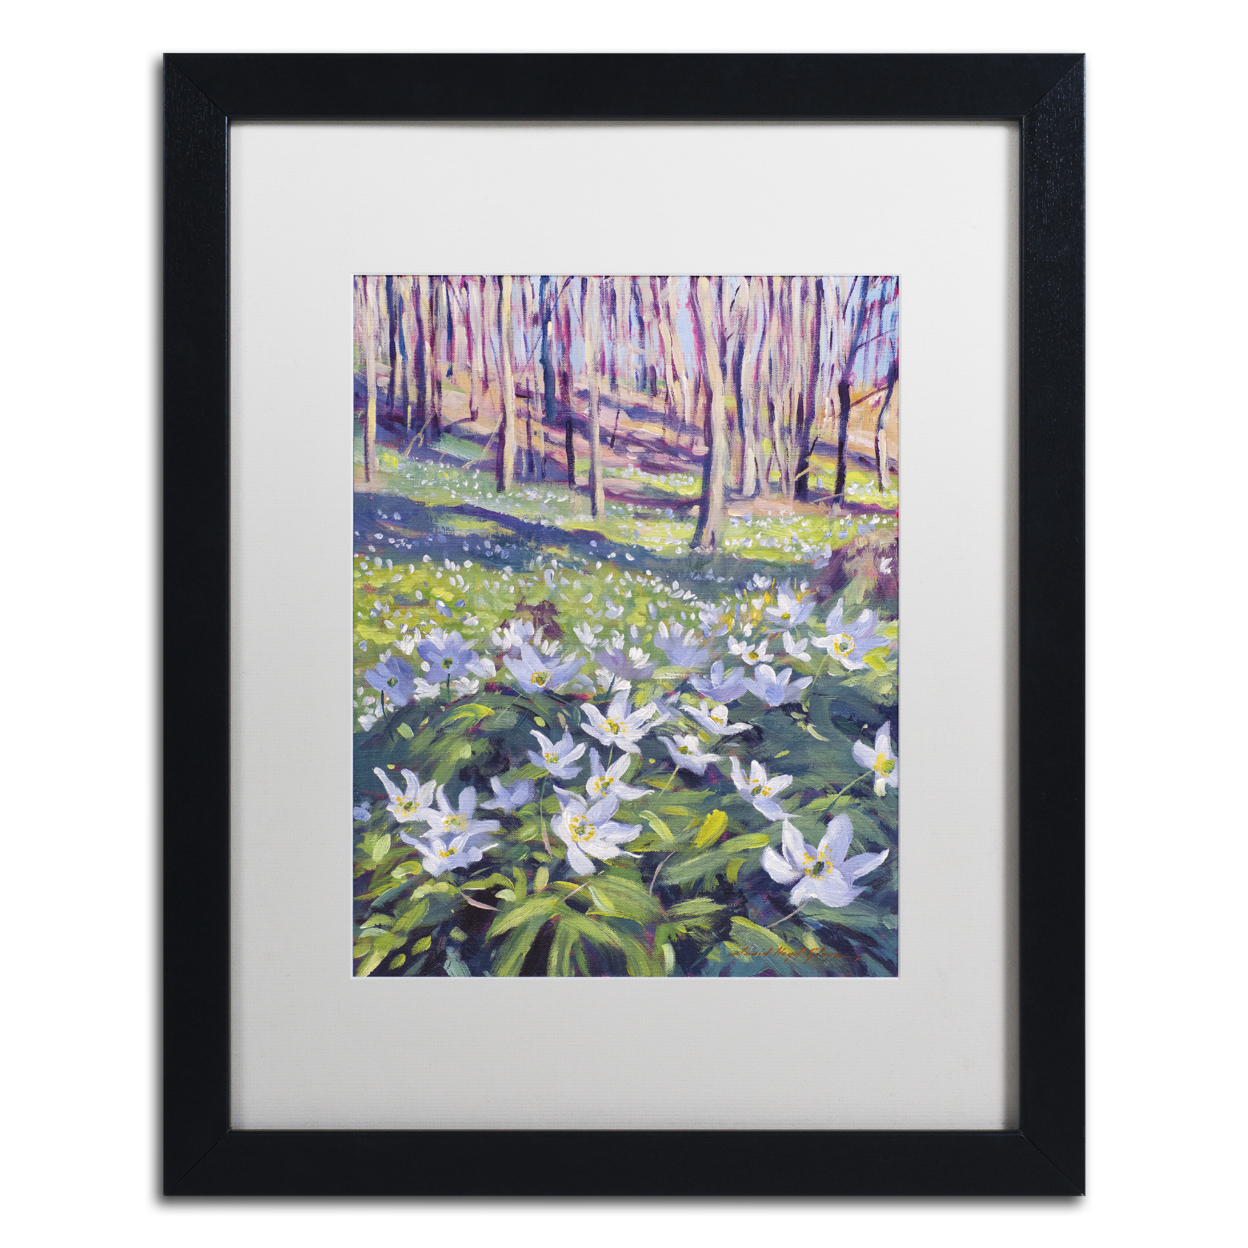 David Lloyd Glover 'Anemones In The Meadow' Black Wooden Framed Art 18 X 22 Inches